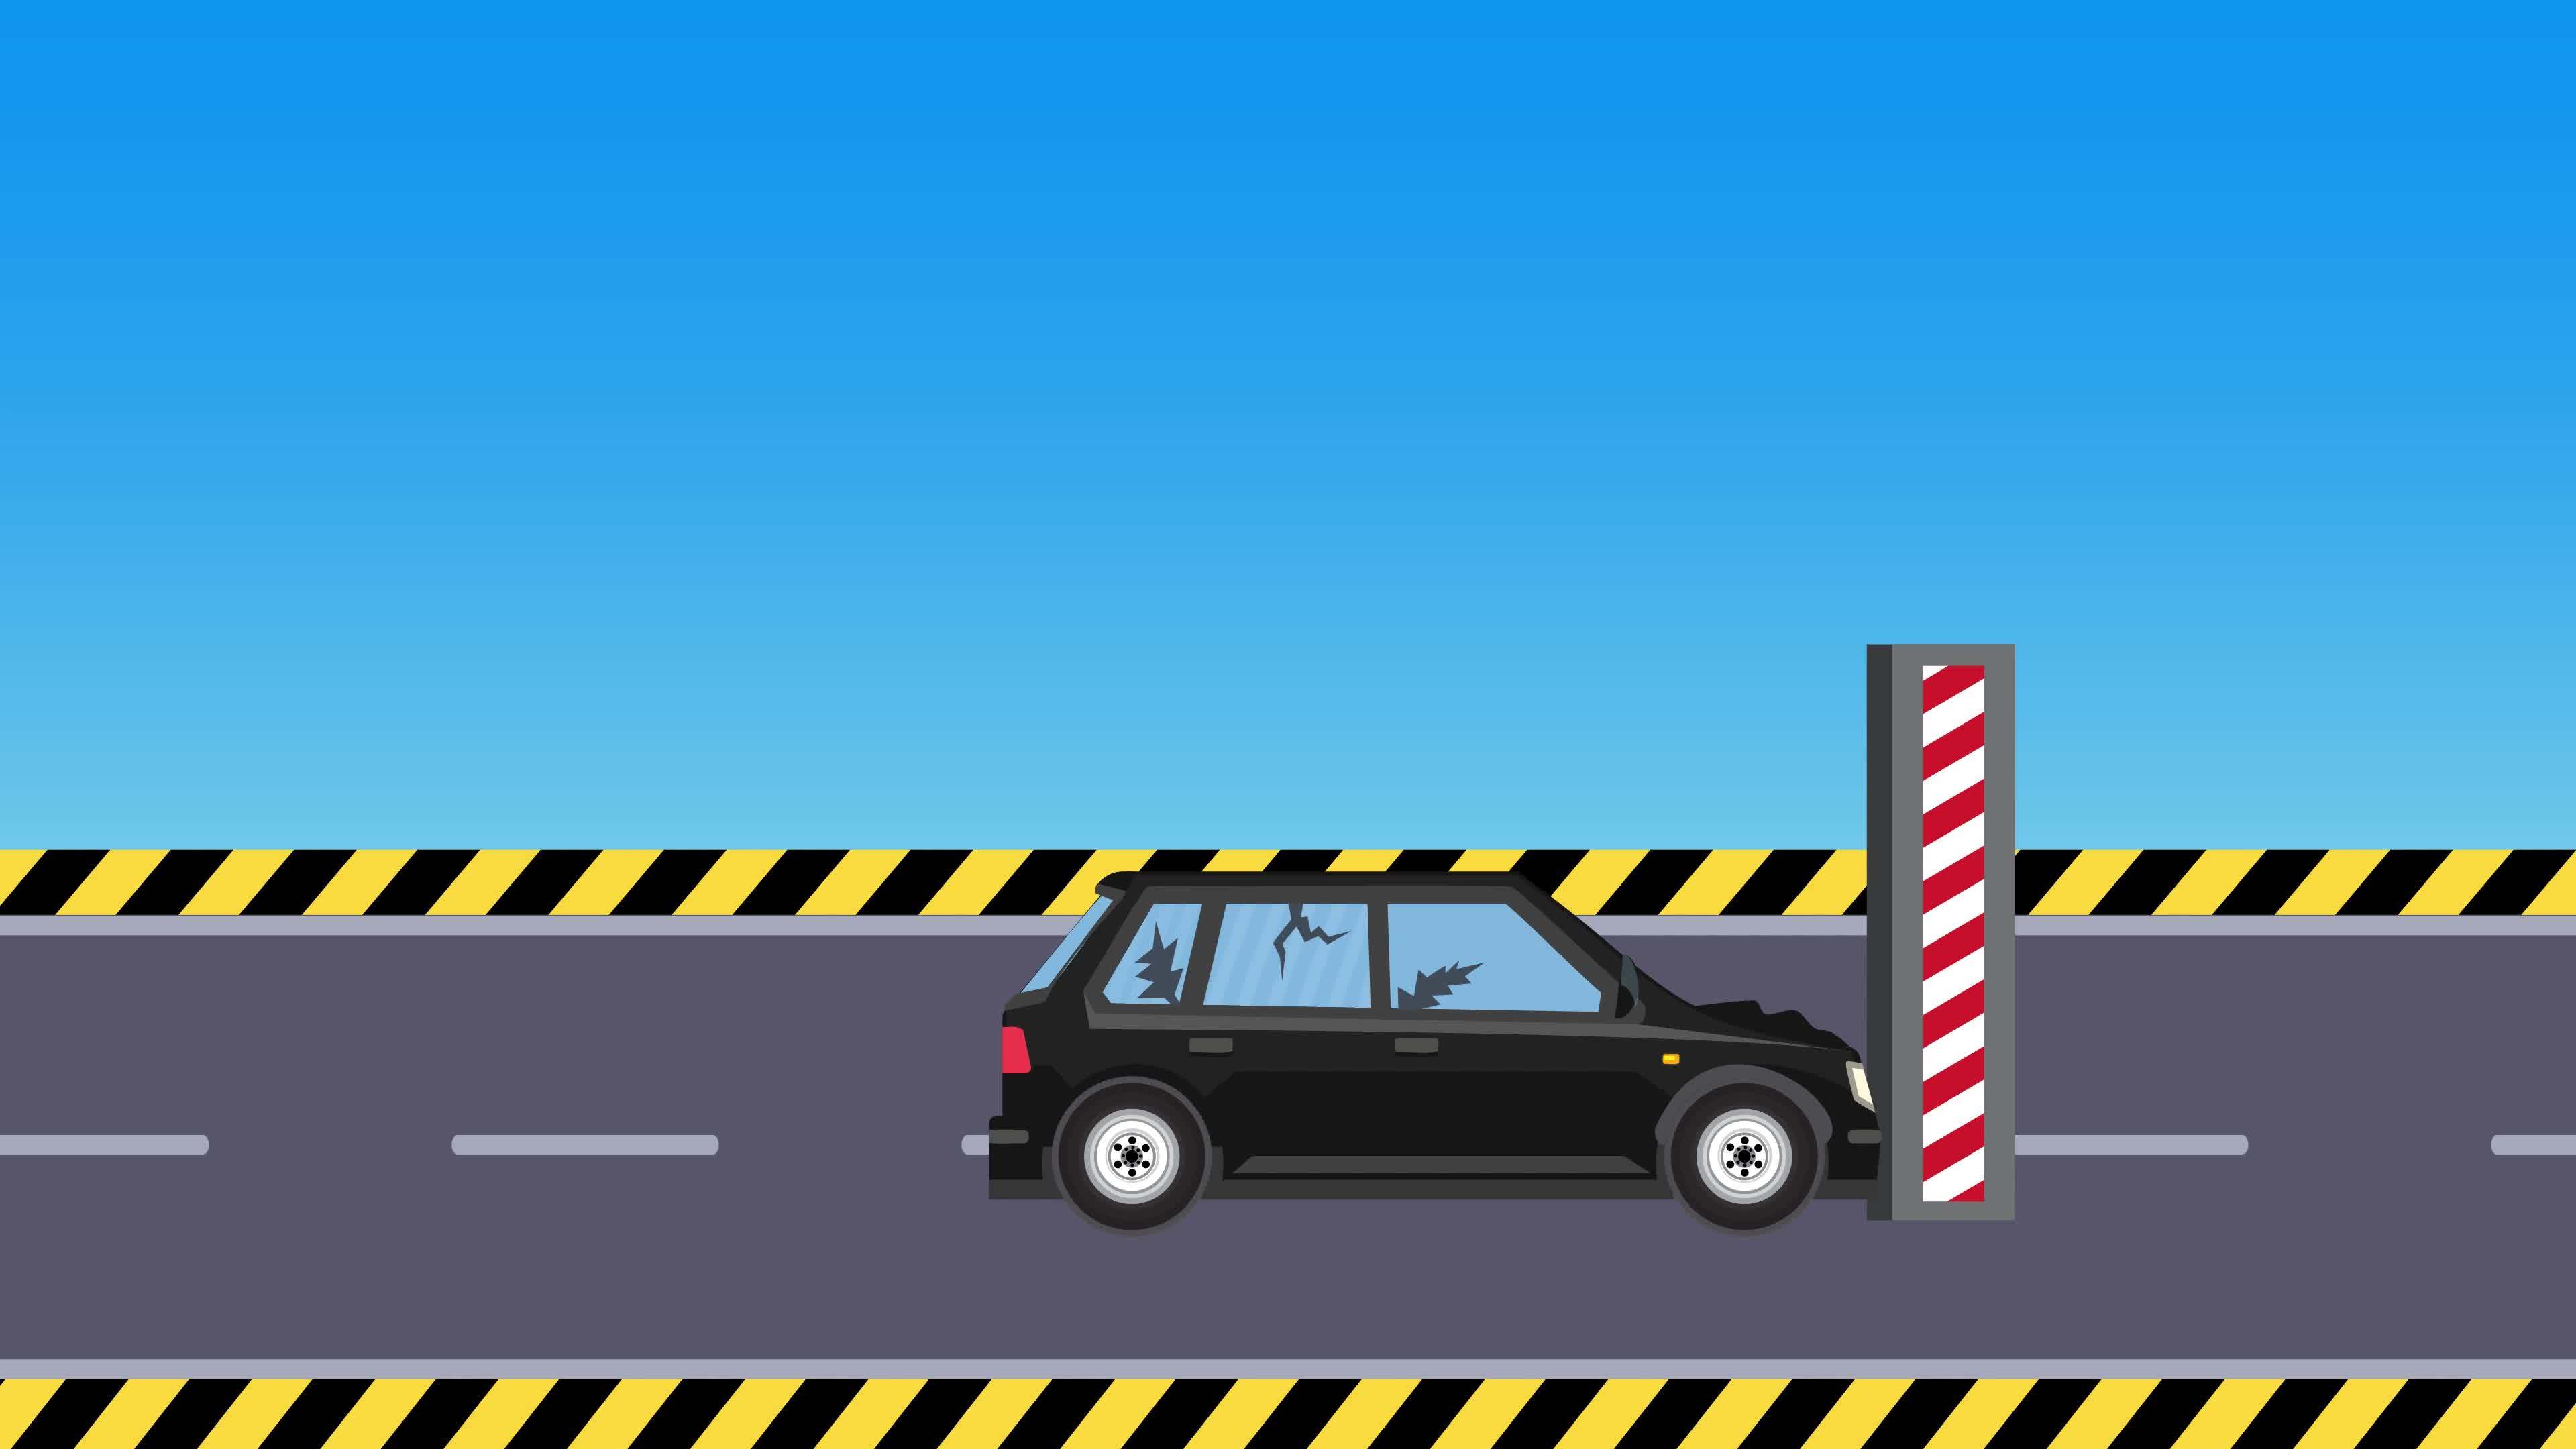 Car Accident Animation Stock Video Footage for Free Download